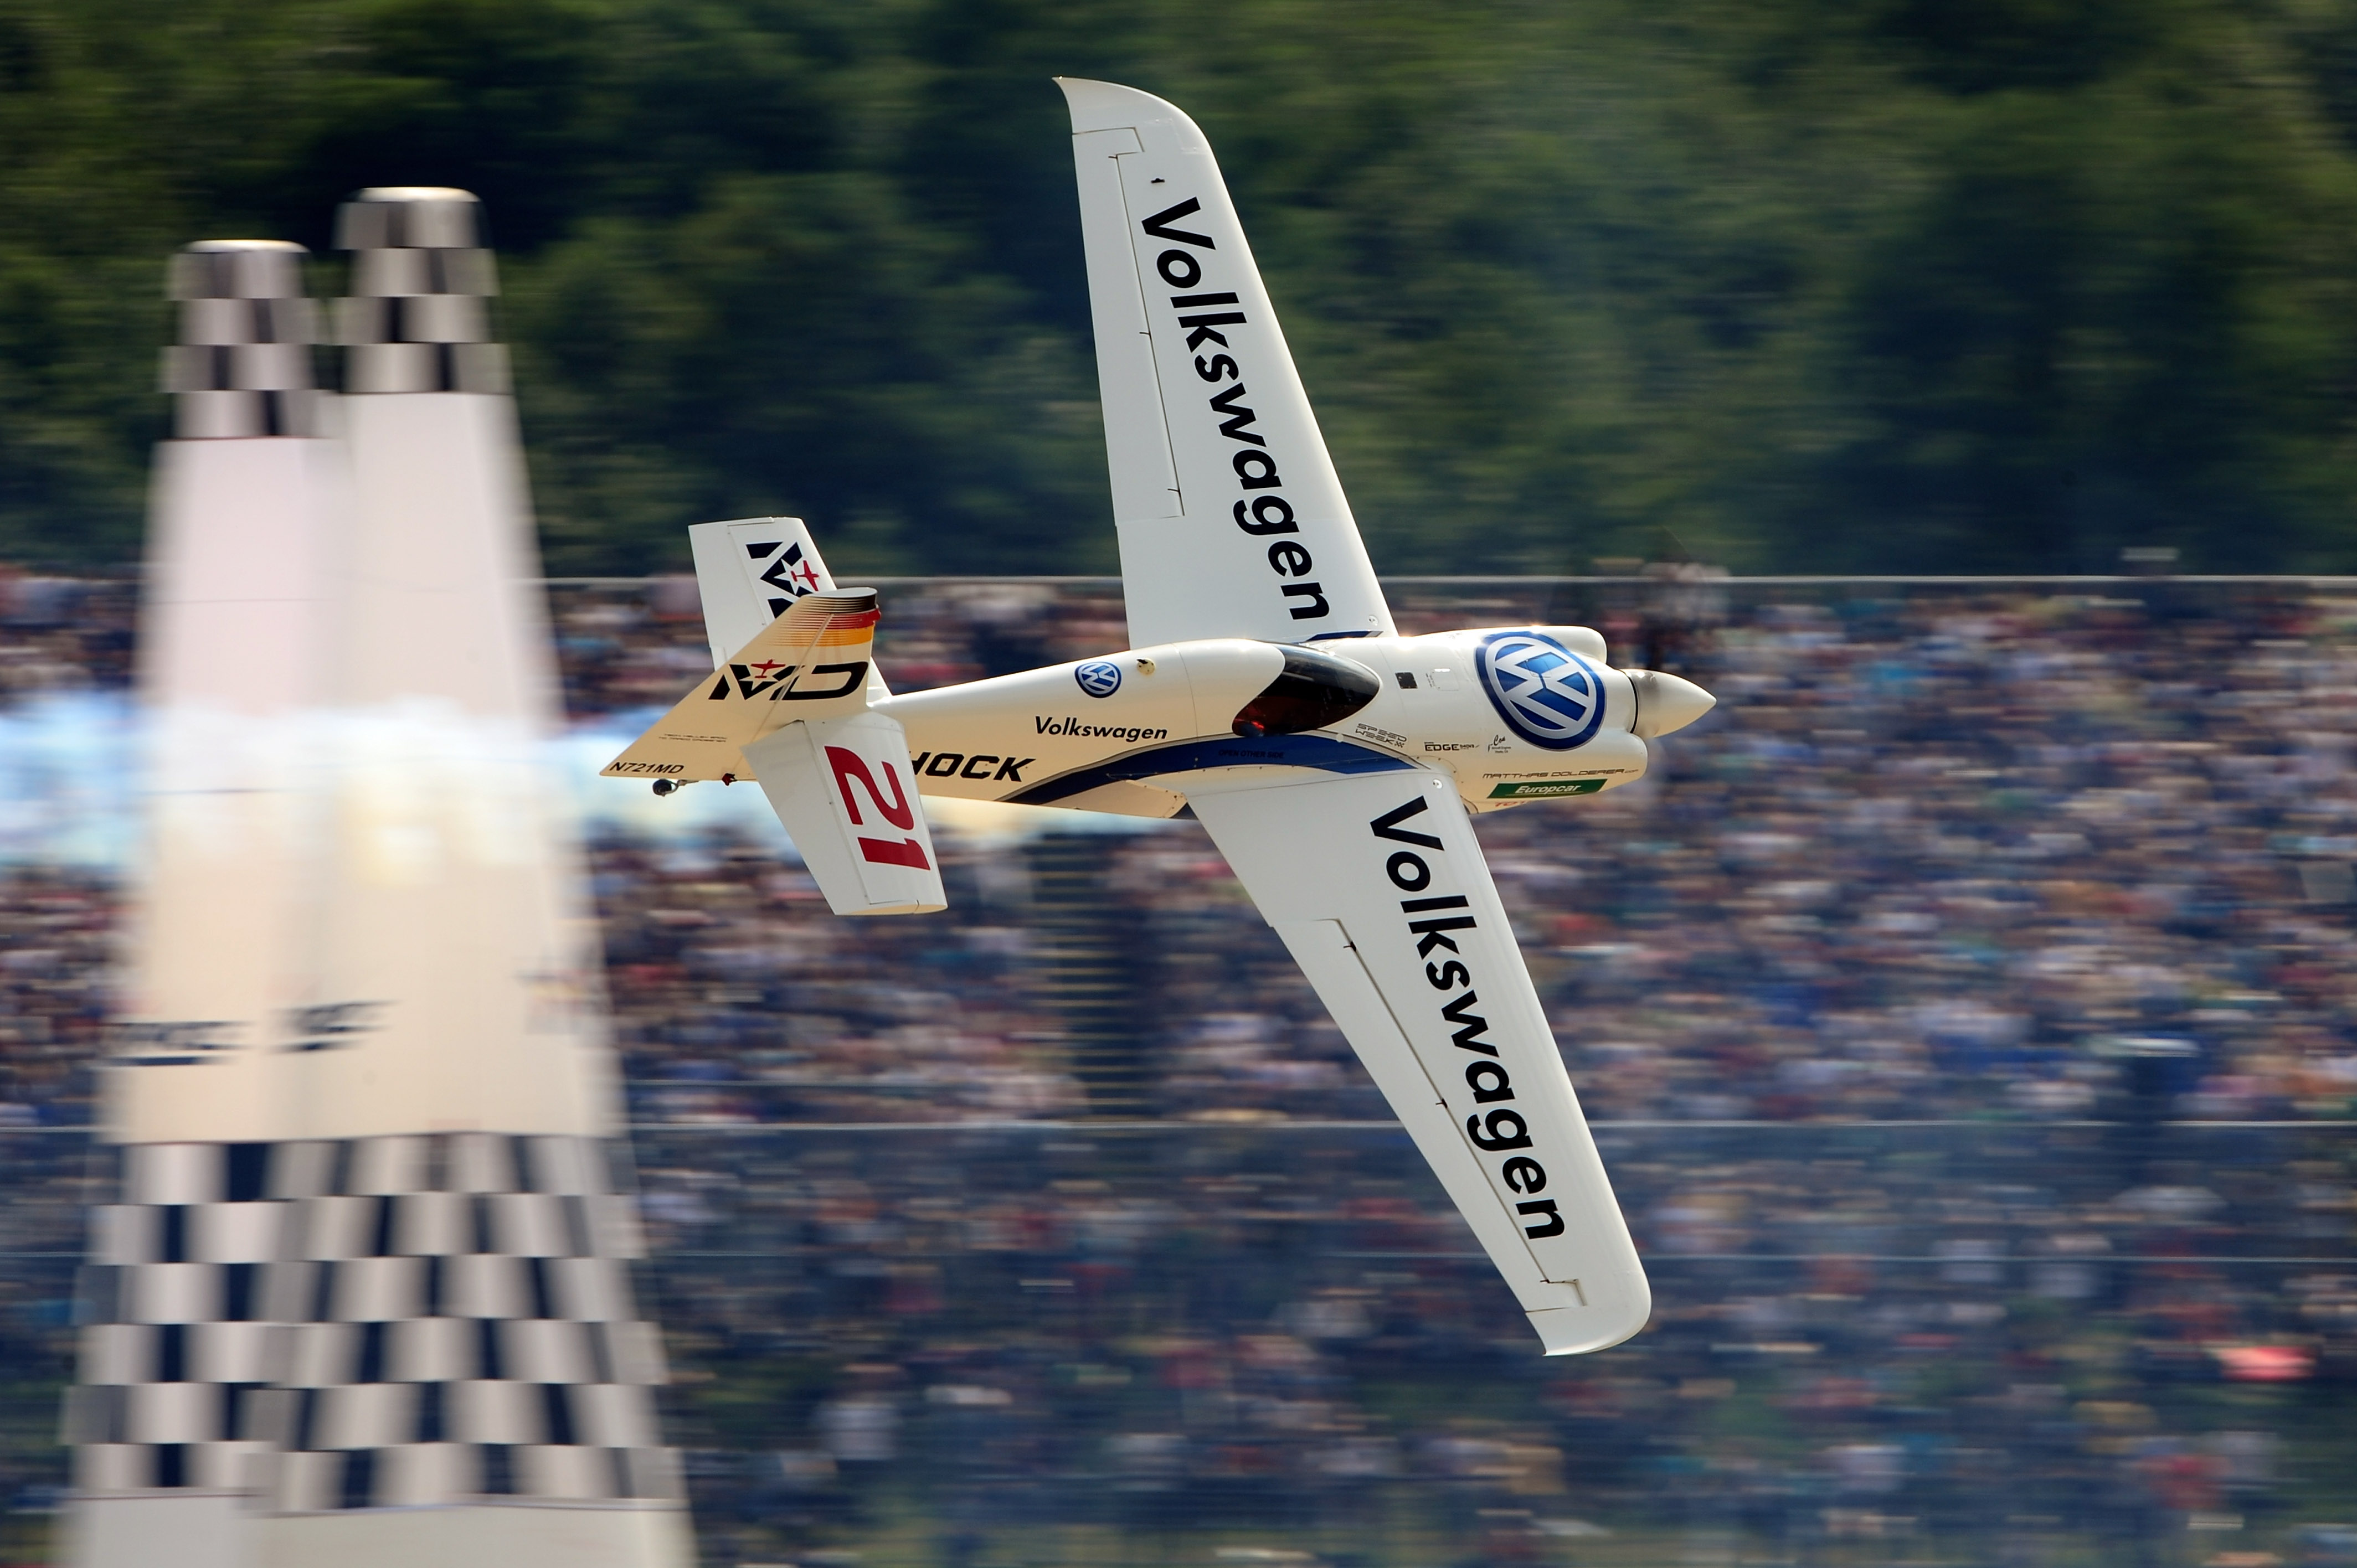 red bull air race, Airplane, Plane, Race, Racing, Red, Bull, Aircraft